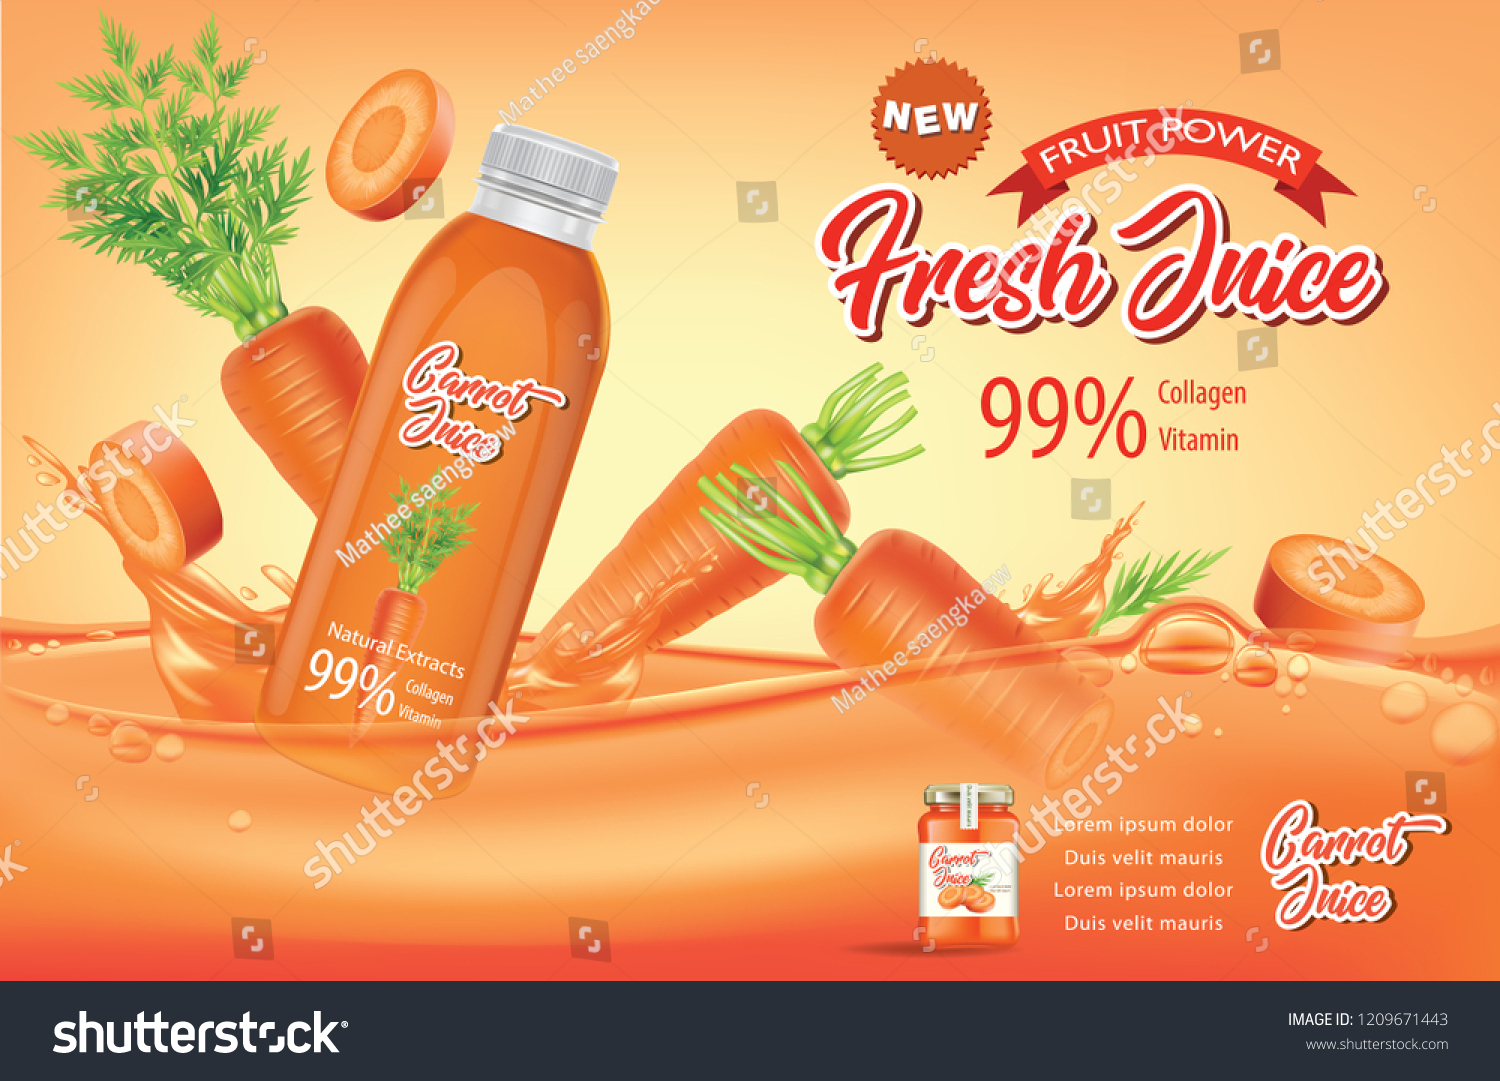 Download Juice Ads Bottle Carrot Slices Splashes Stock Vector Royalty Free 1209671443 PSD Mockup Templates